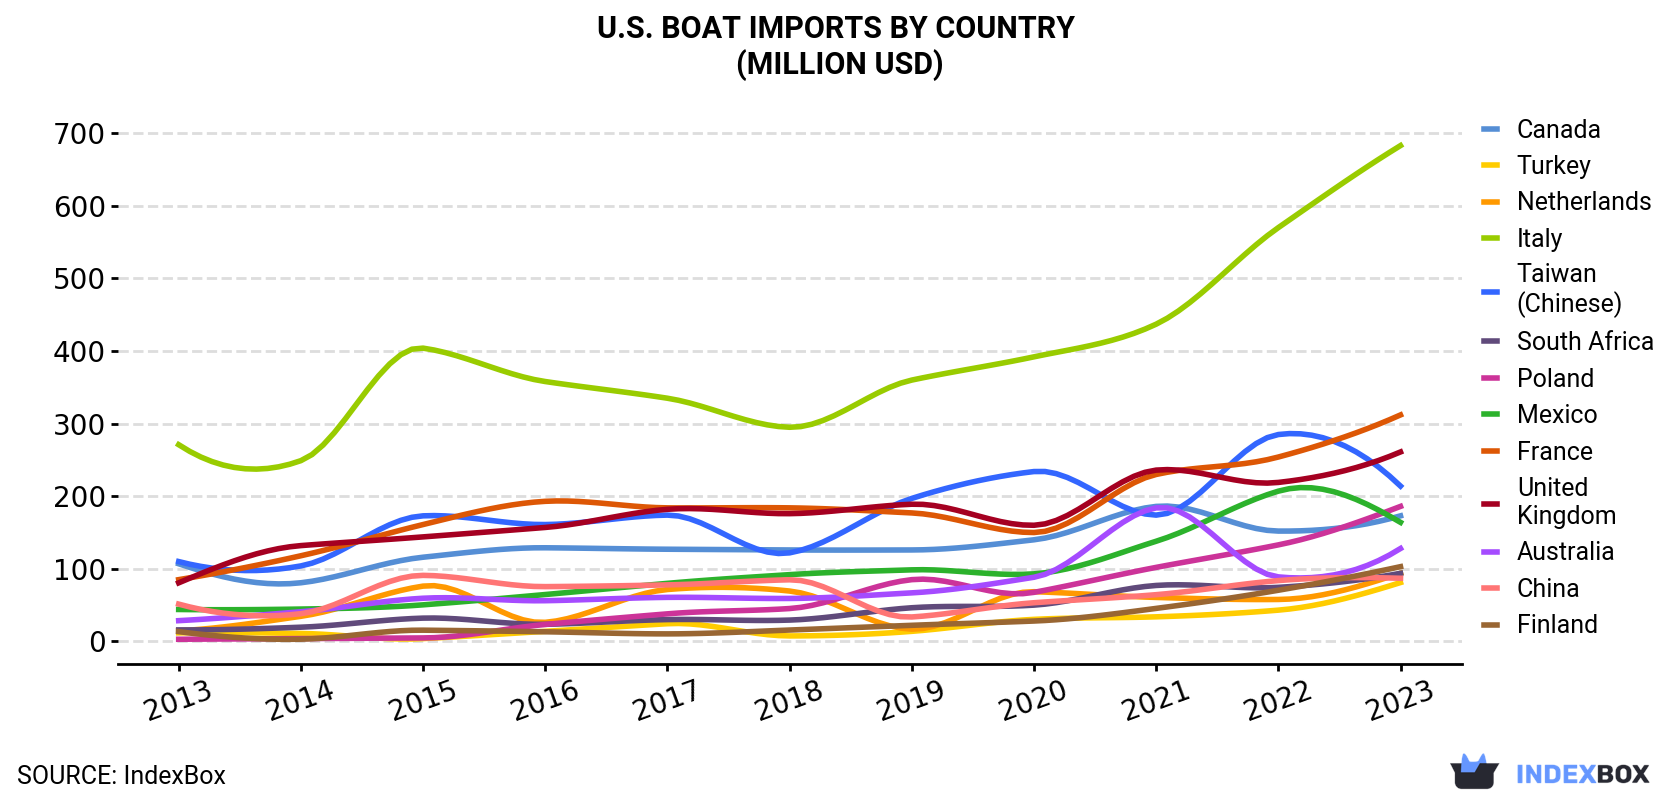 U.S. Boat Imports By Country (Million USD)